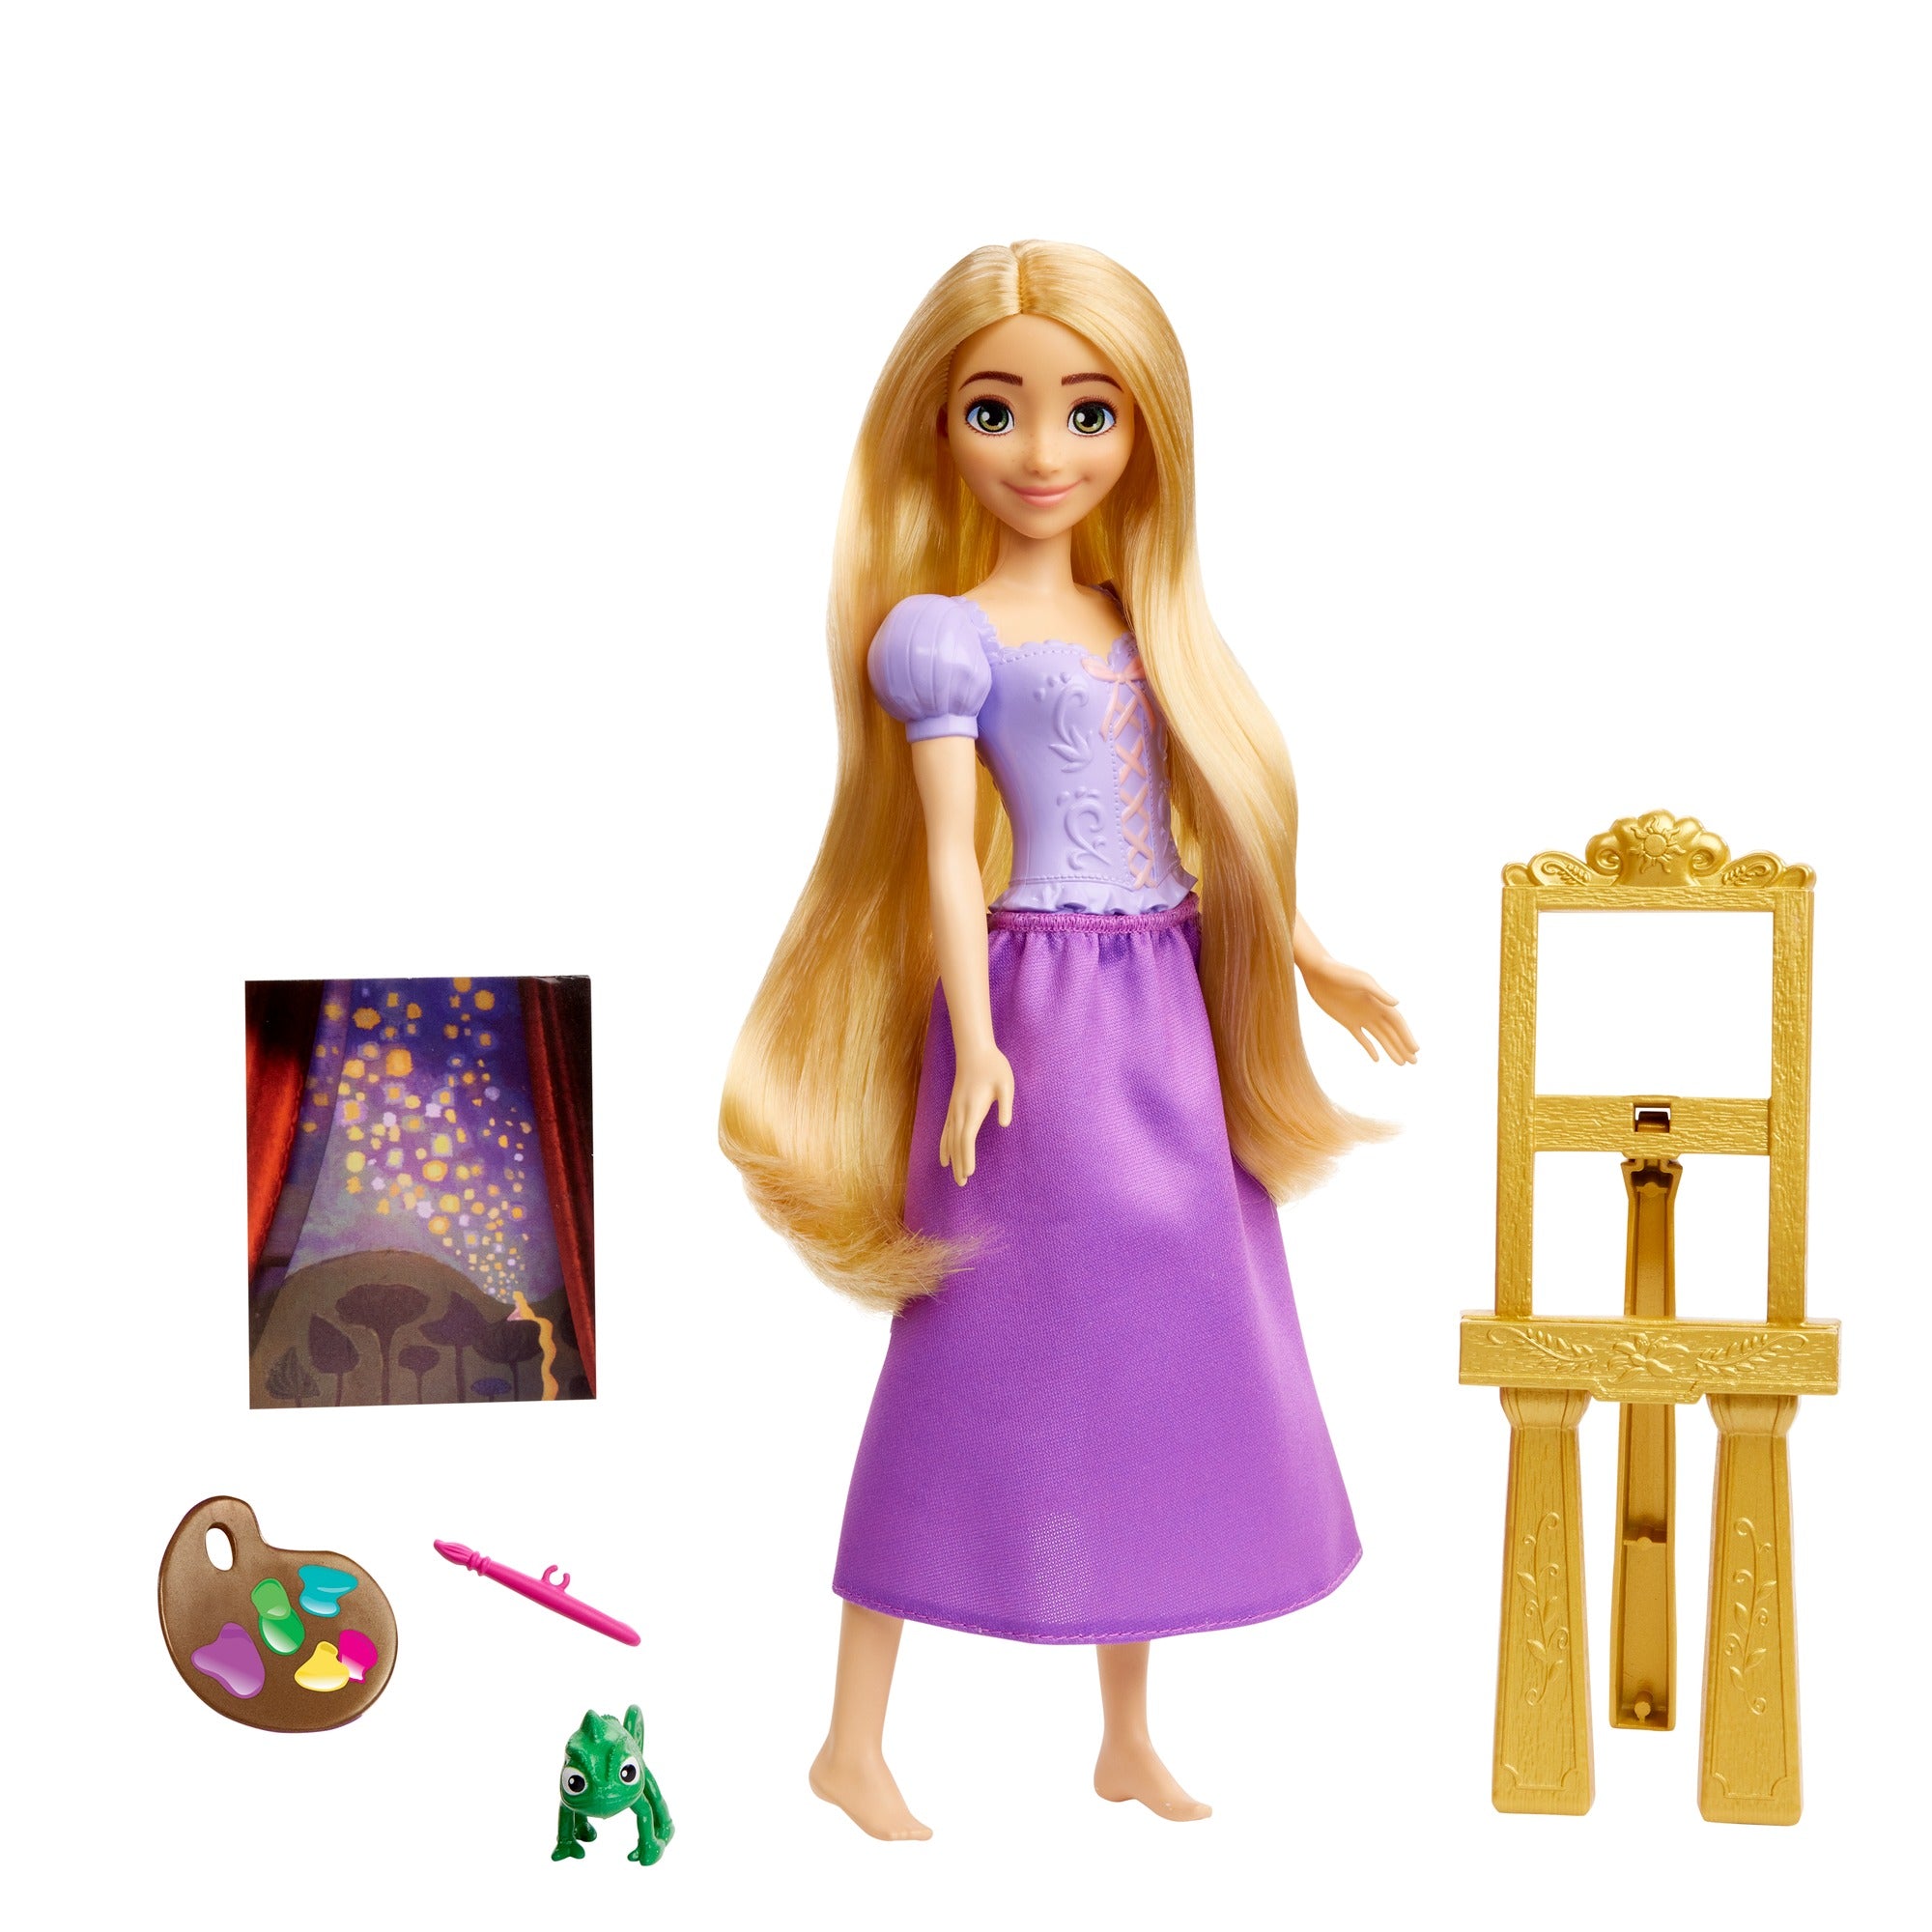 Disney Princess Rapunzel Fashion Doll with Pascal Figure and Accessories Inspired by the Disney Movie for Kids Ages 3+